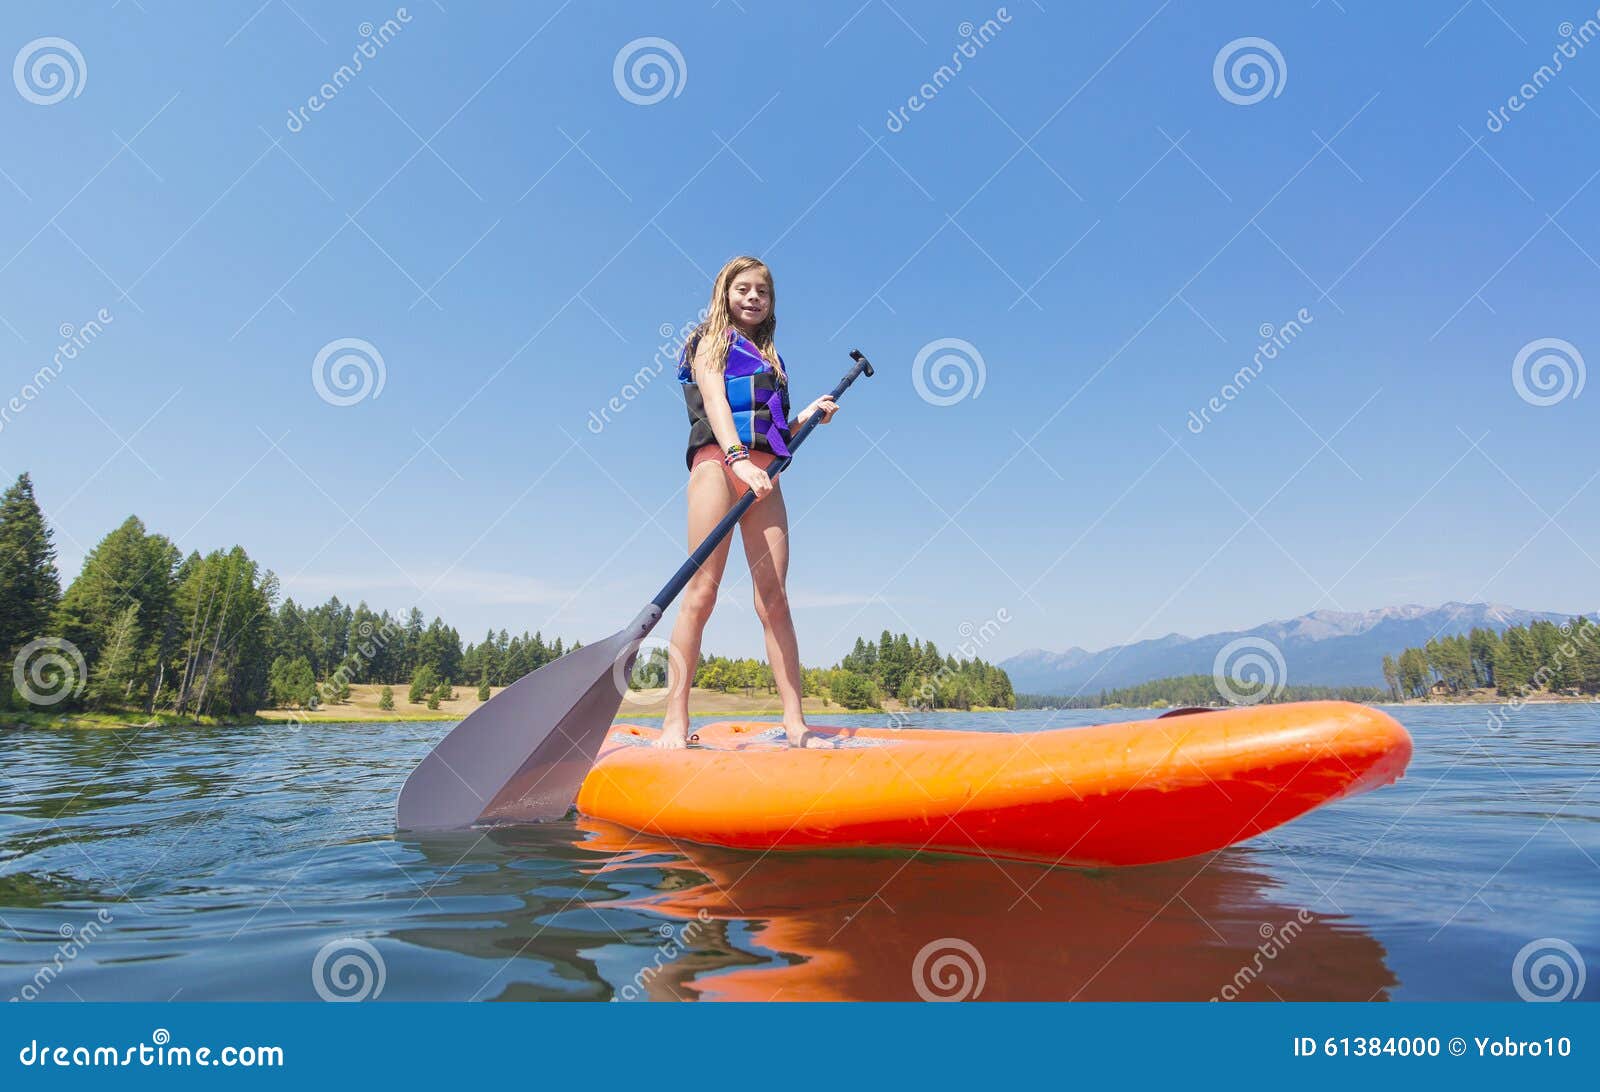 Child On A Stand Up Paddle Board On A Beautiful Mountain Lake Stock ...